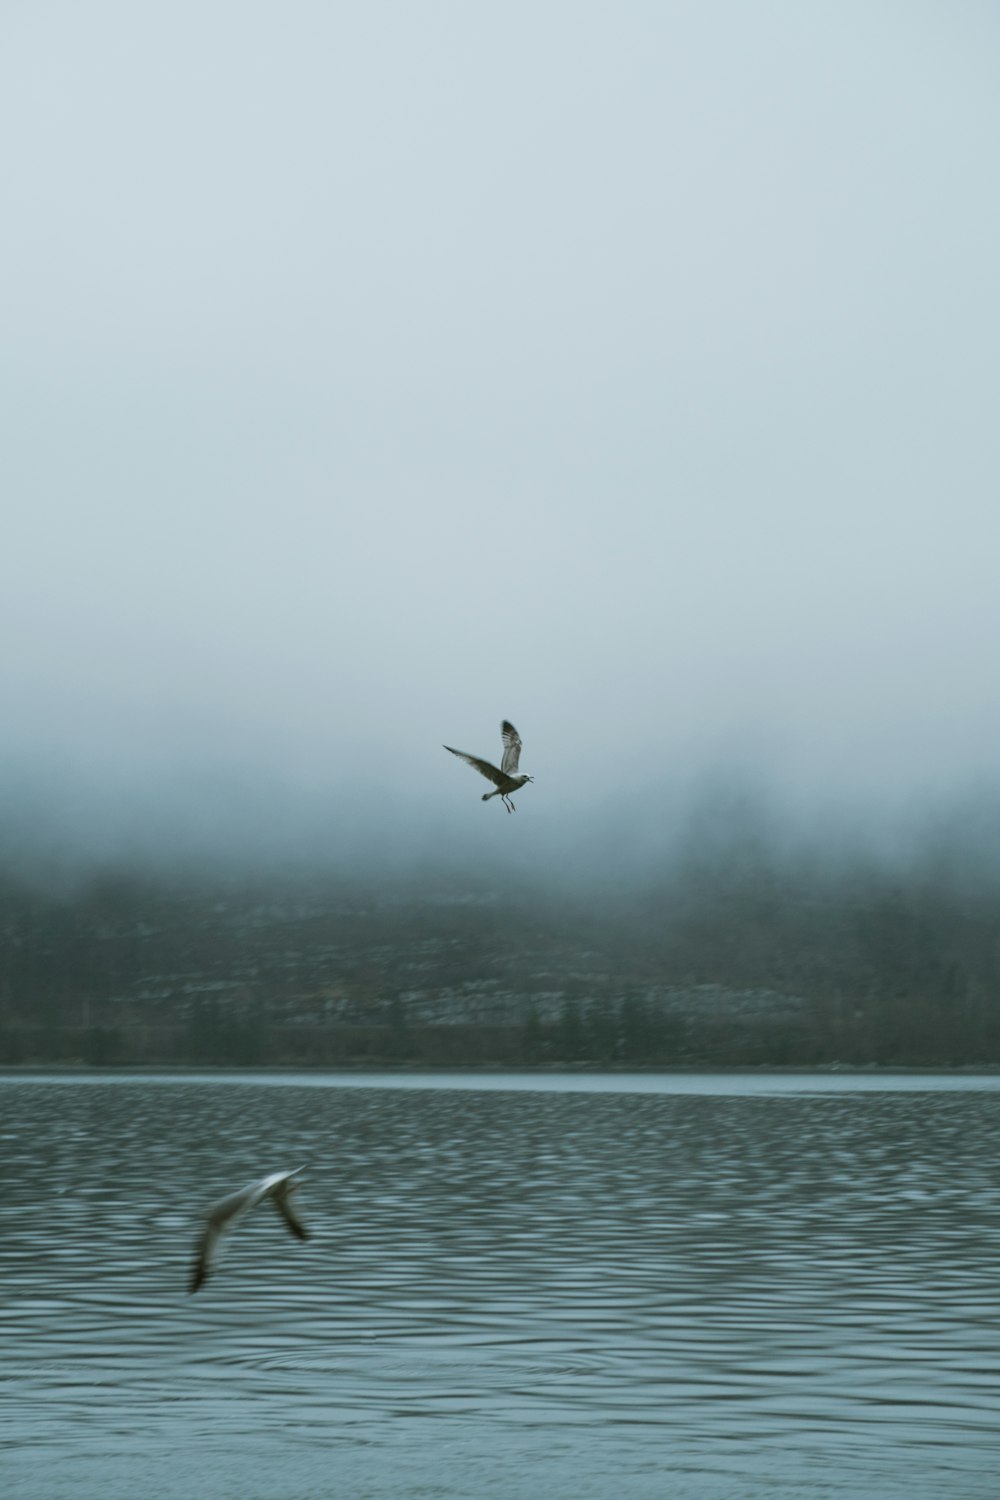 two birds flying on mid air above body of water during daytime